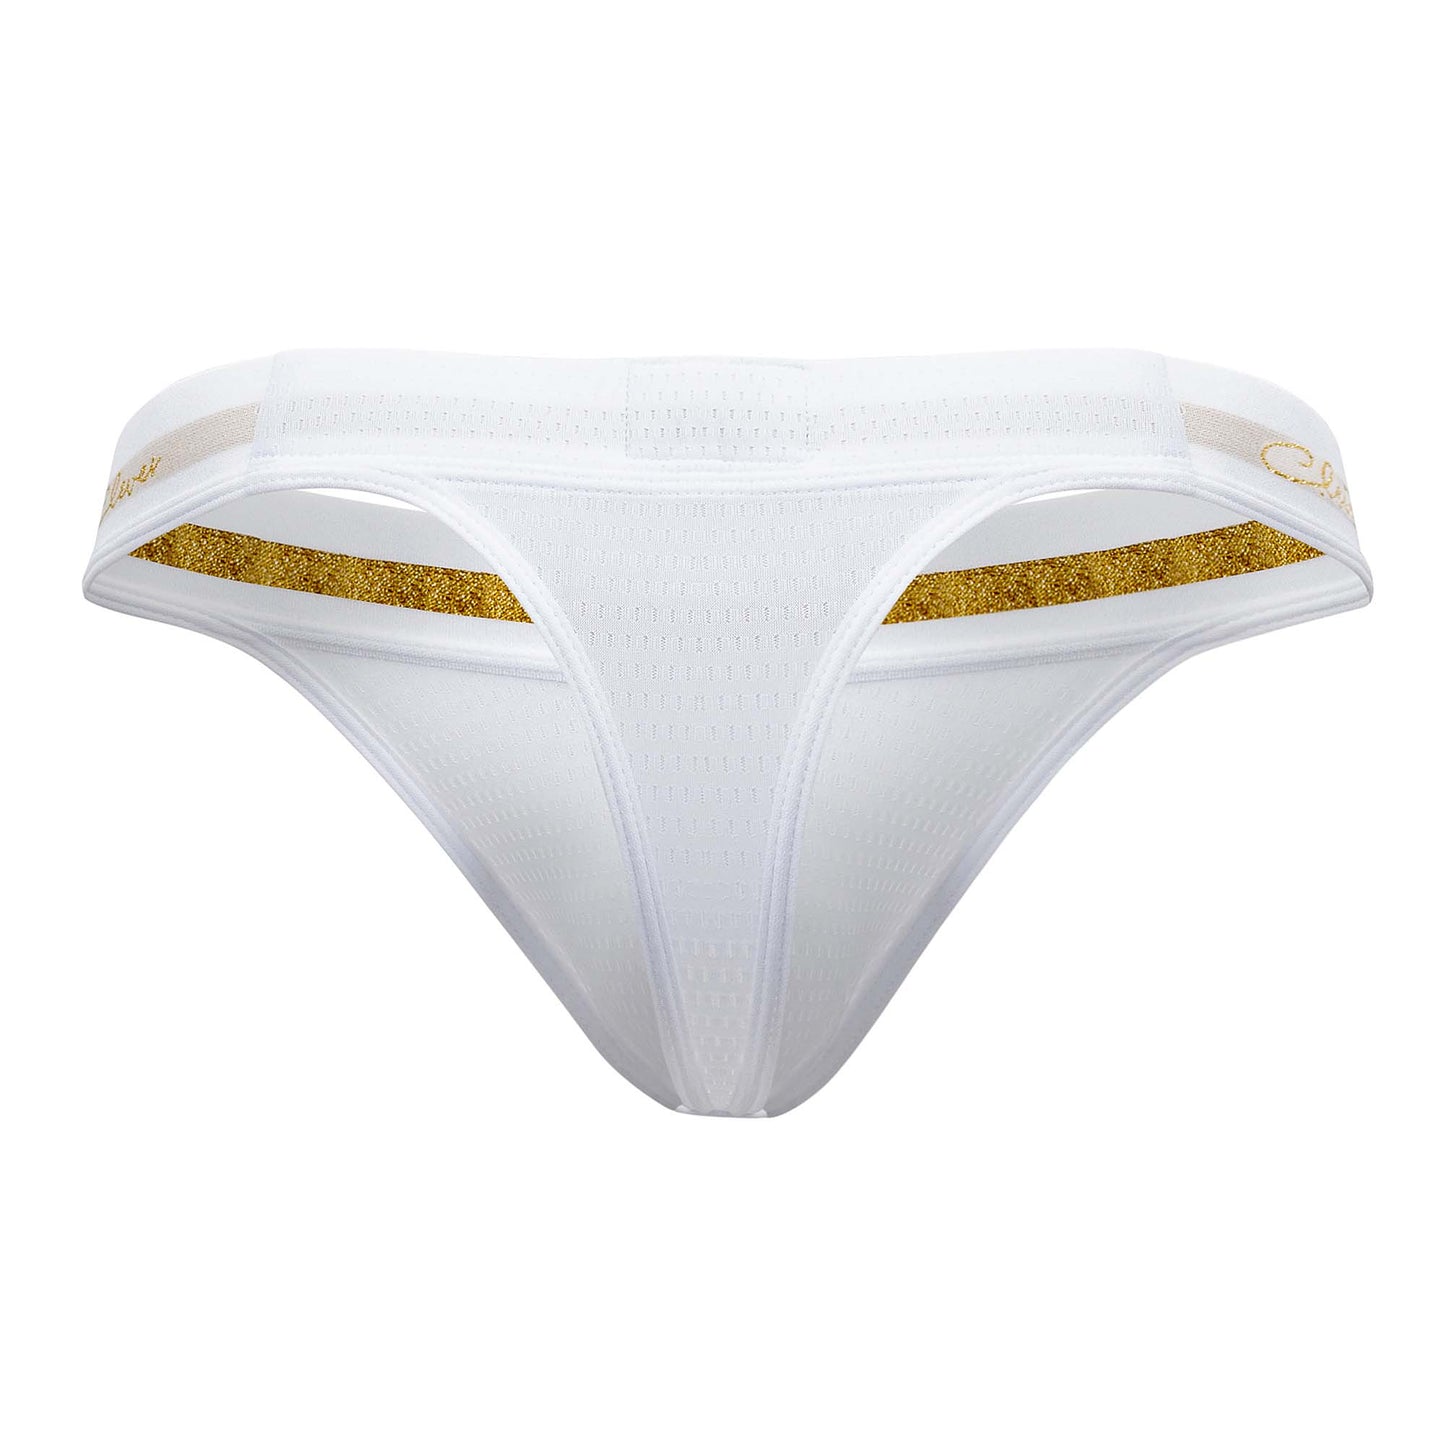 Clever 0922 Lifeblood Thongs